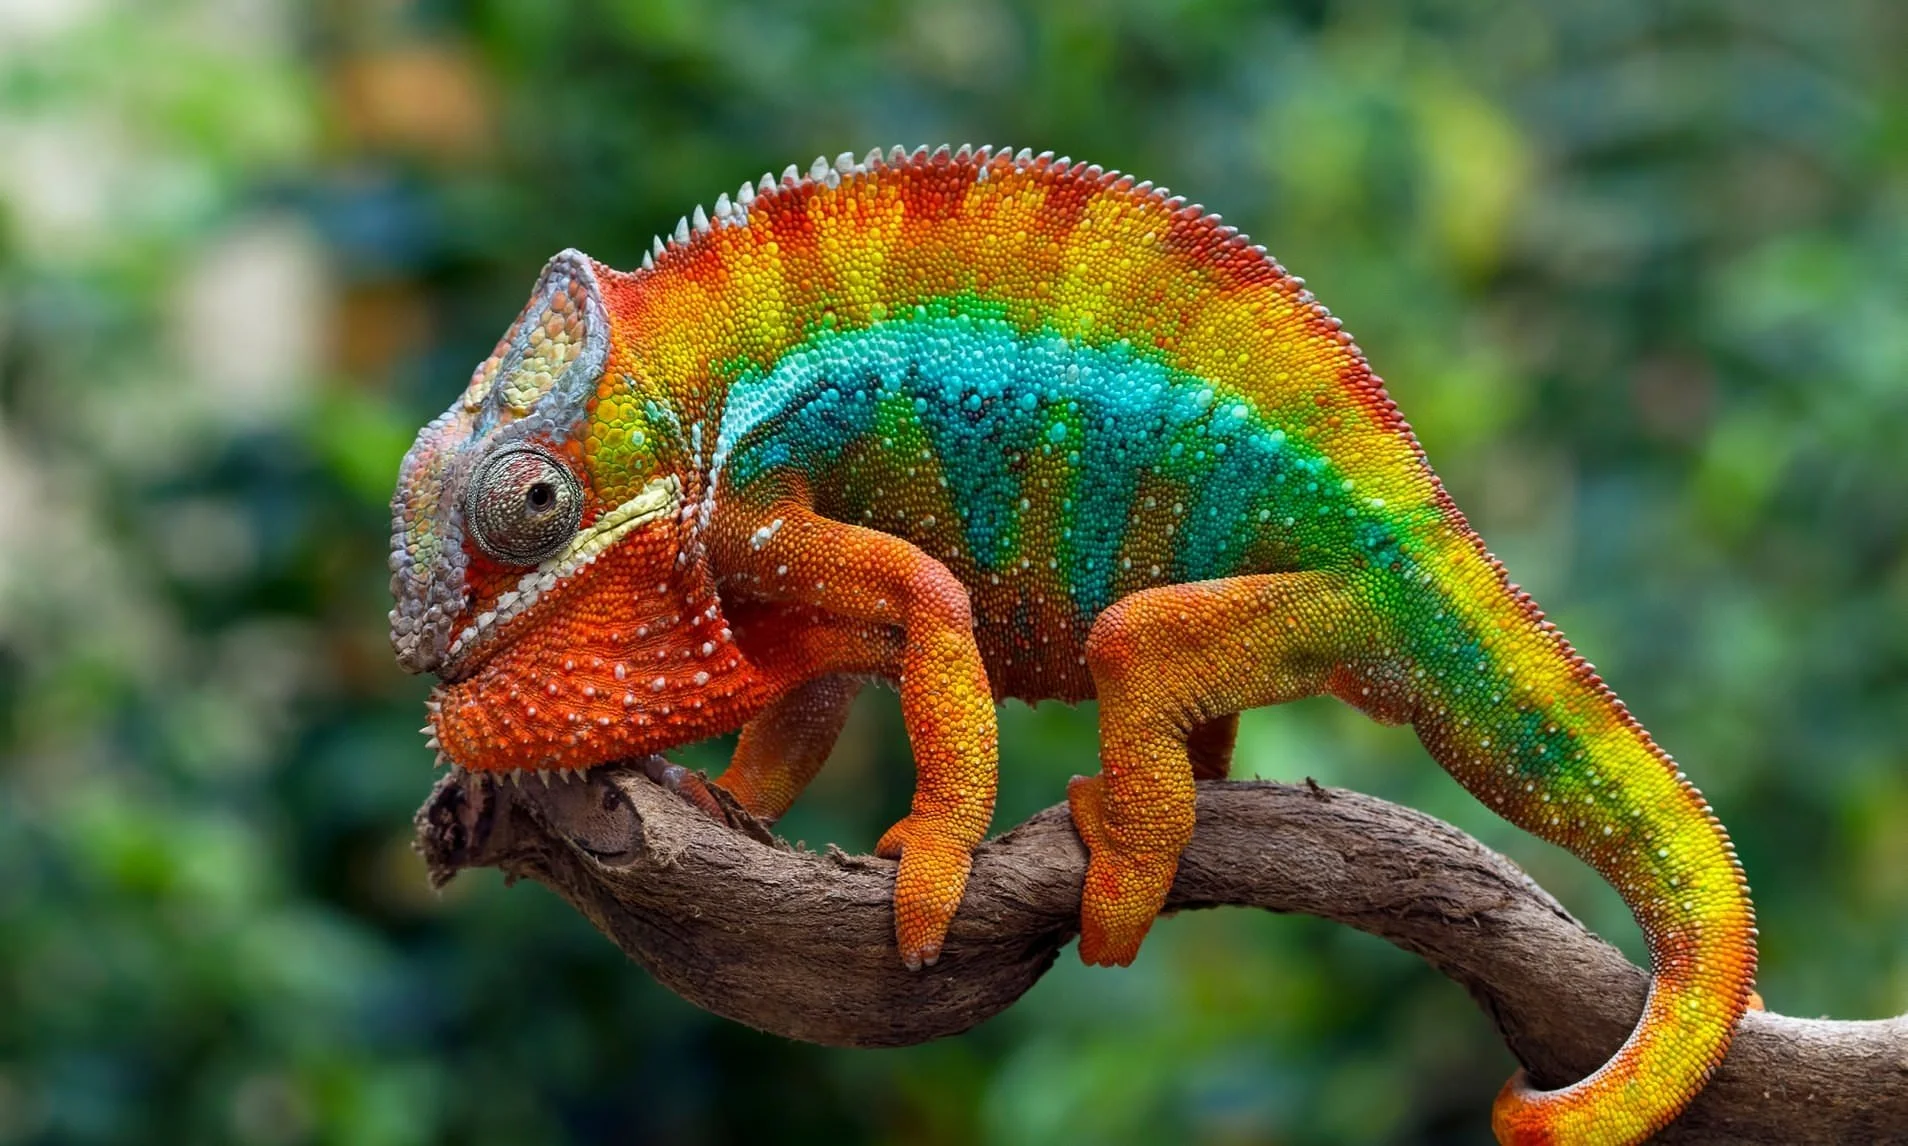 Unusual but Adorable: Top 10 Exotic Pets for the Brave and Curious